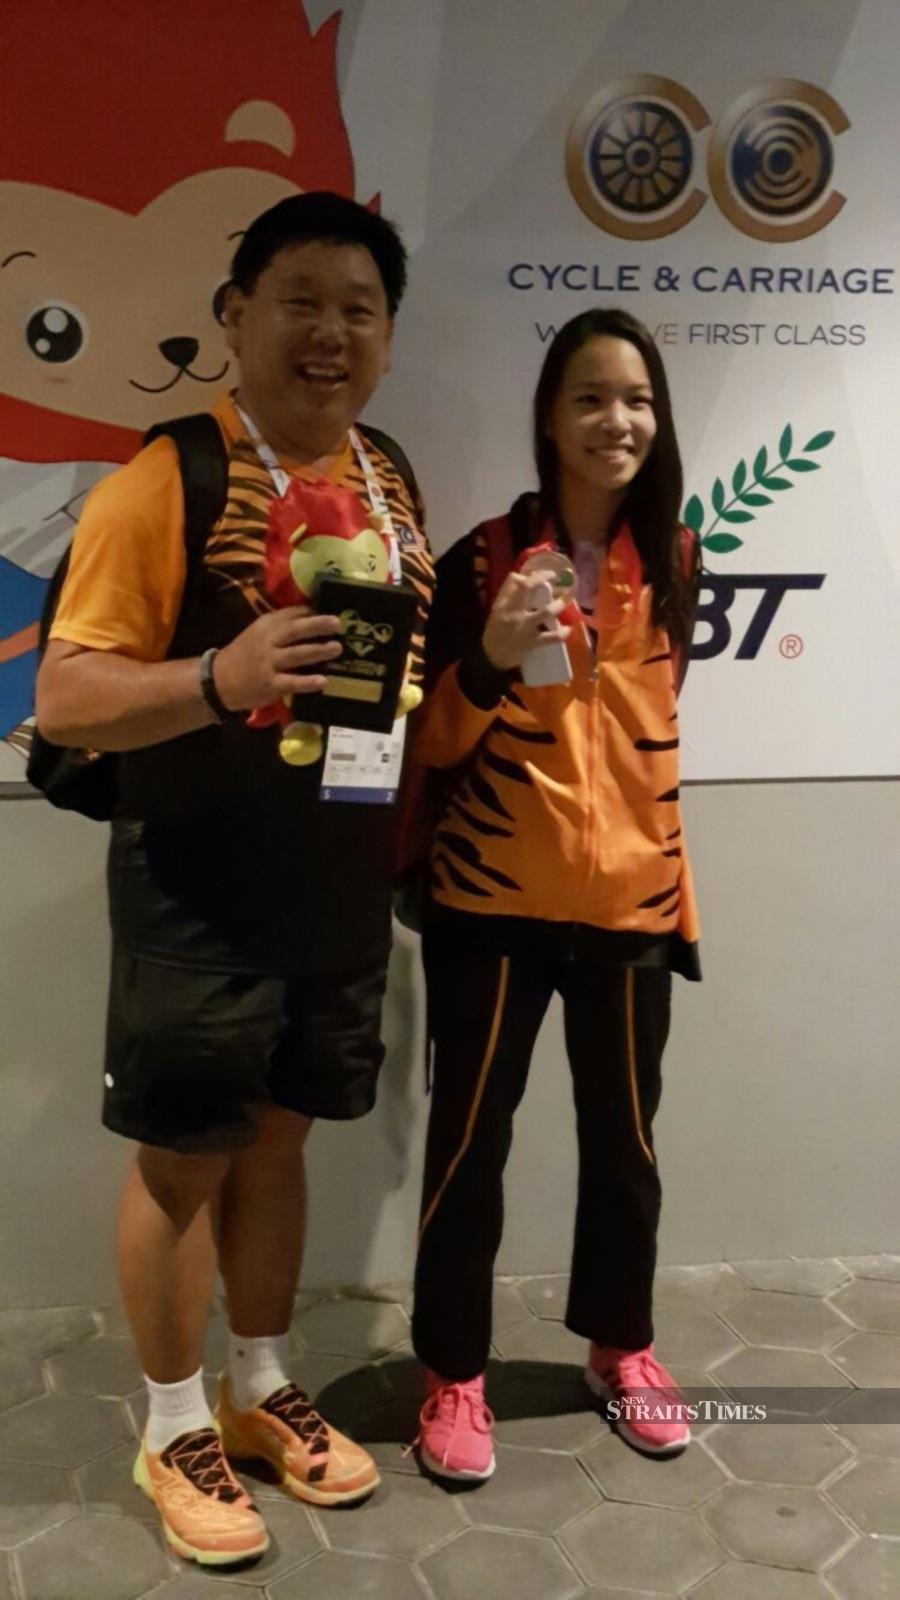  Lim with her coach, Loke Chee Heng.